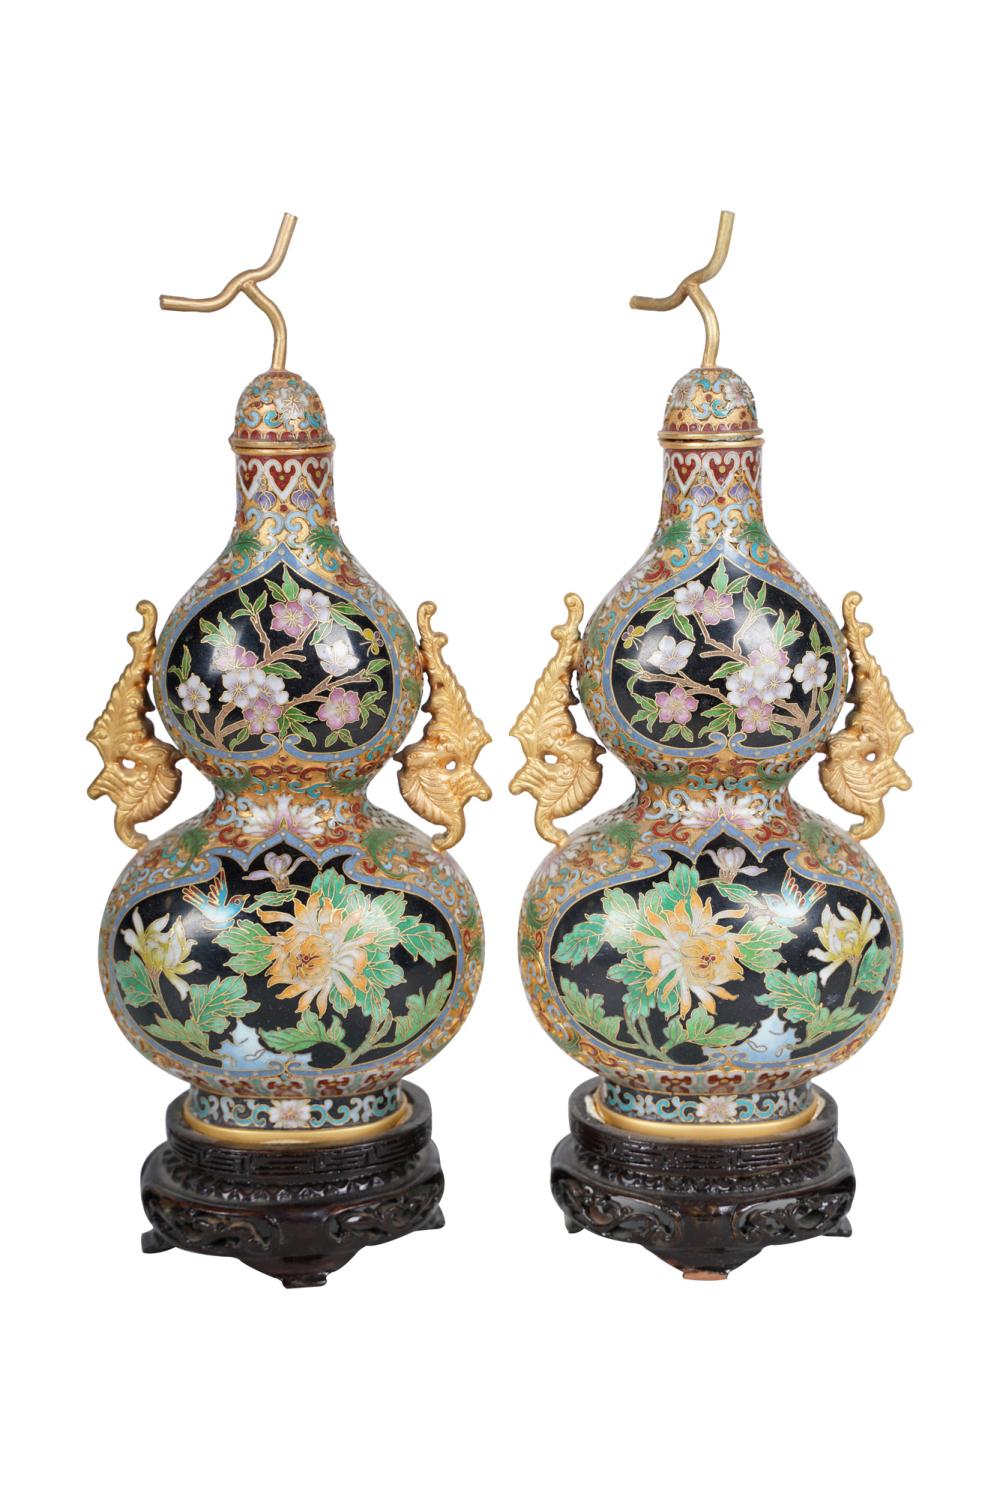 PAIR OF CLOISONNE COVERED GORD